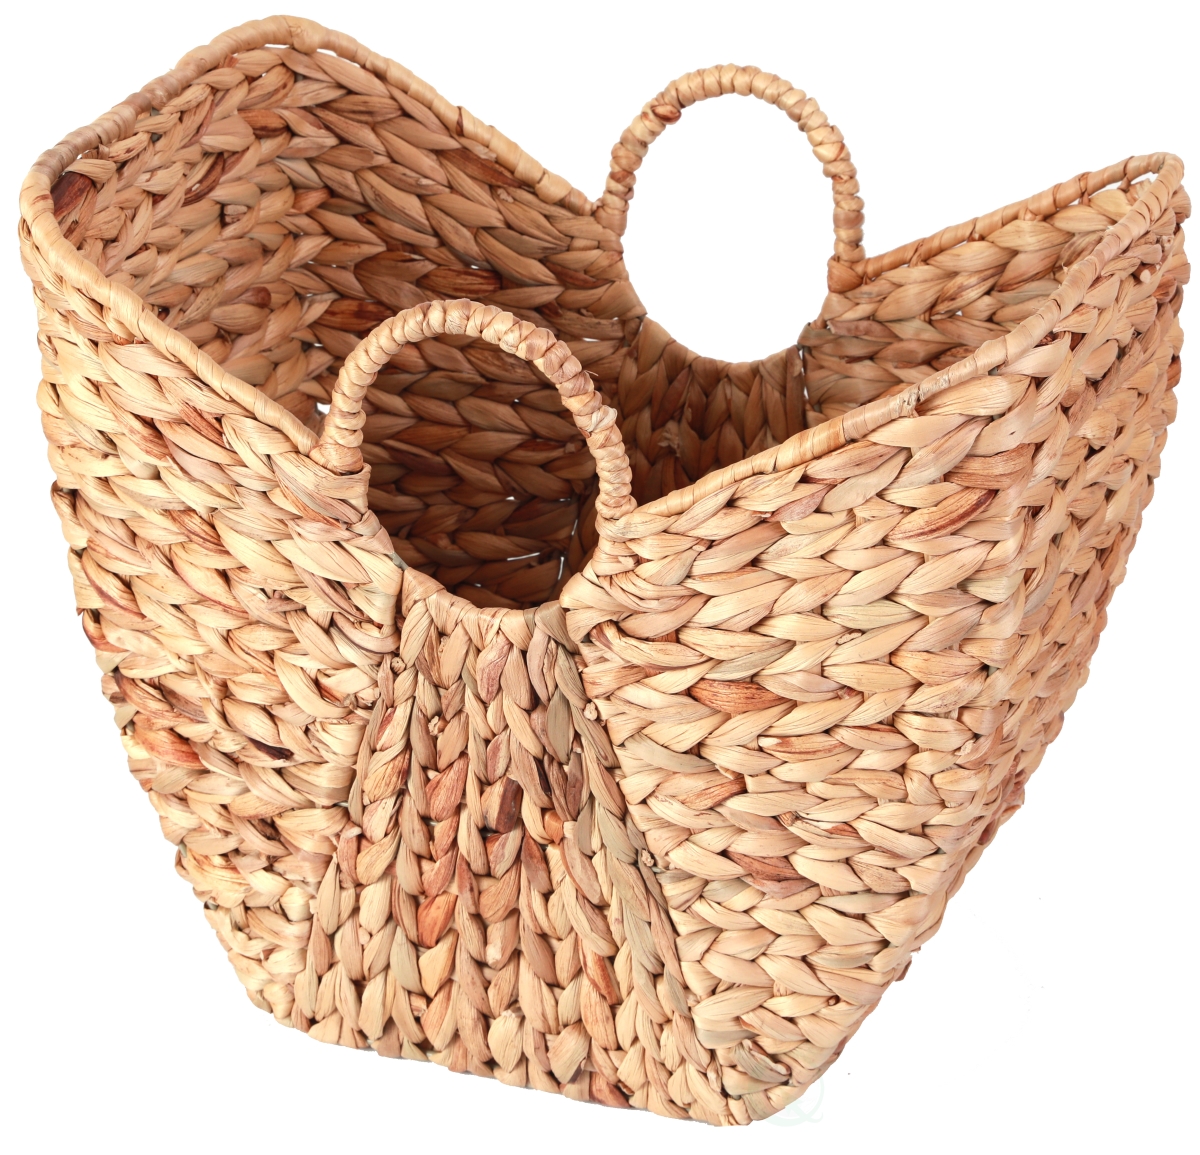 Picture of Vintiquewise QI003361.L 16.5 x 18 x 12 in. Large Wicker Laundry Basket with Round Handles, Brown